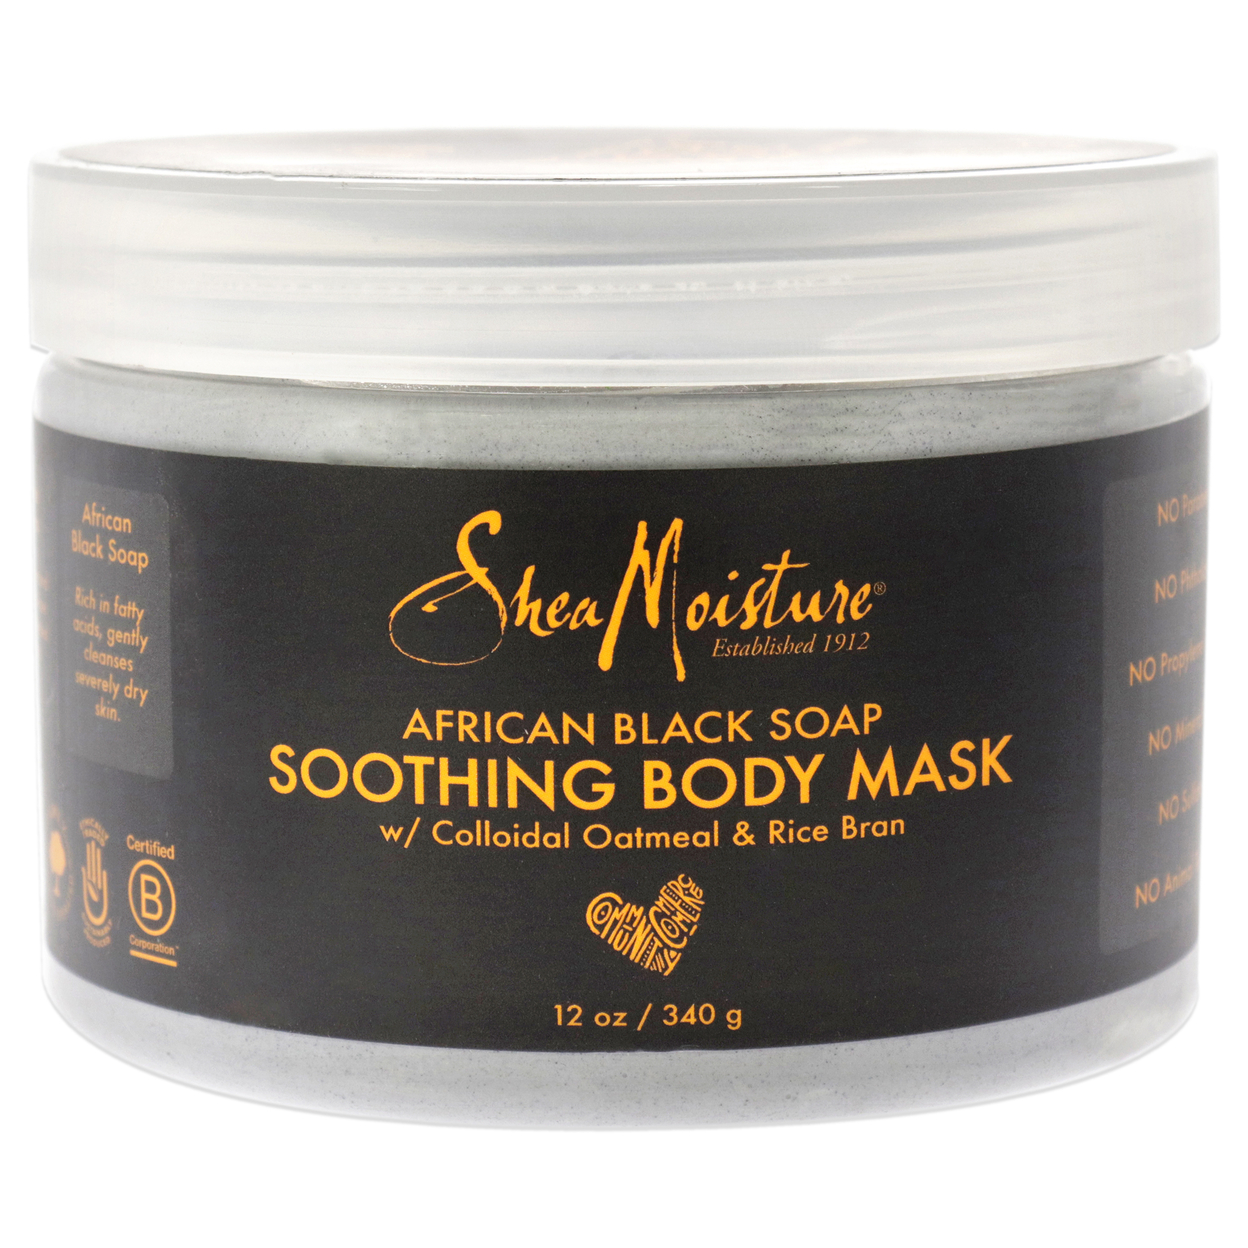 Shea Moisture African Black Soap Soothing Body Mask 12 Oz